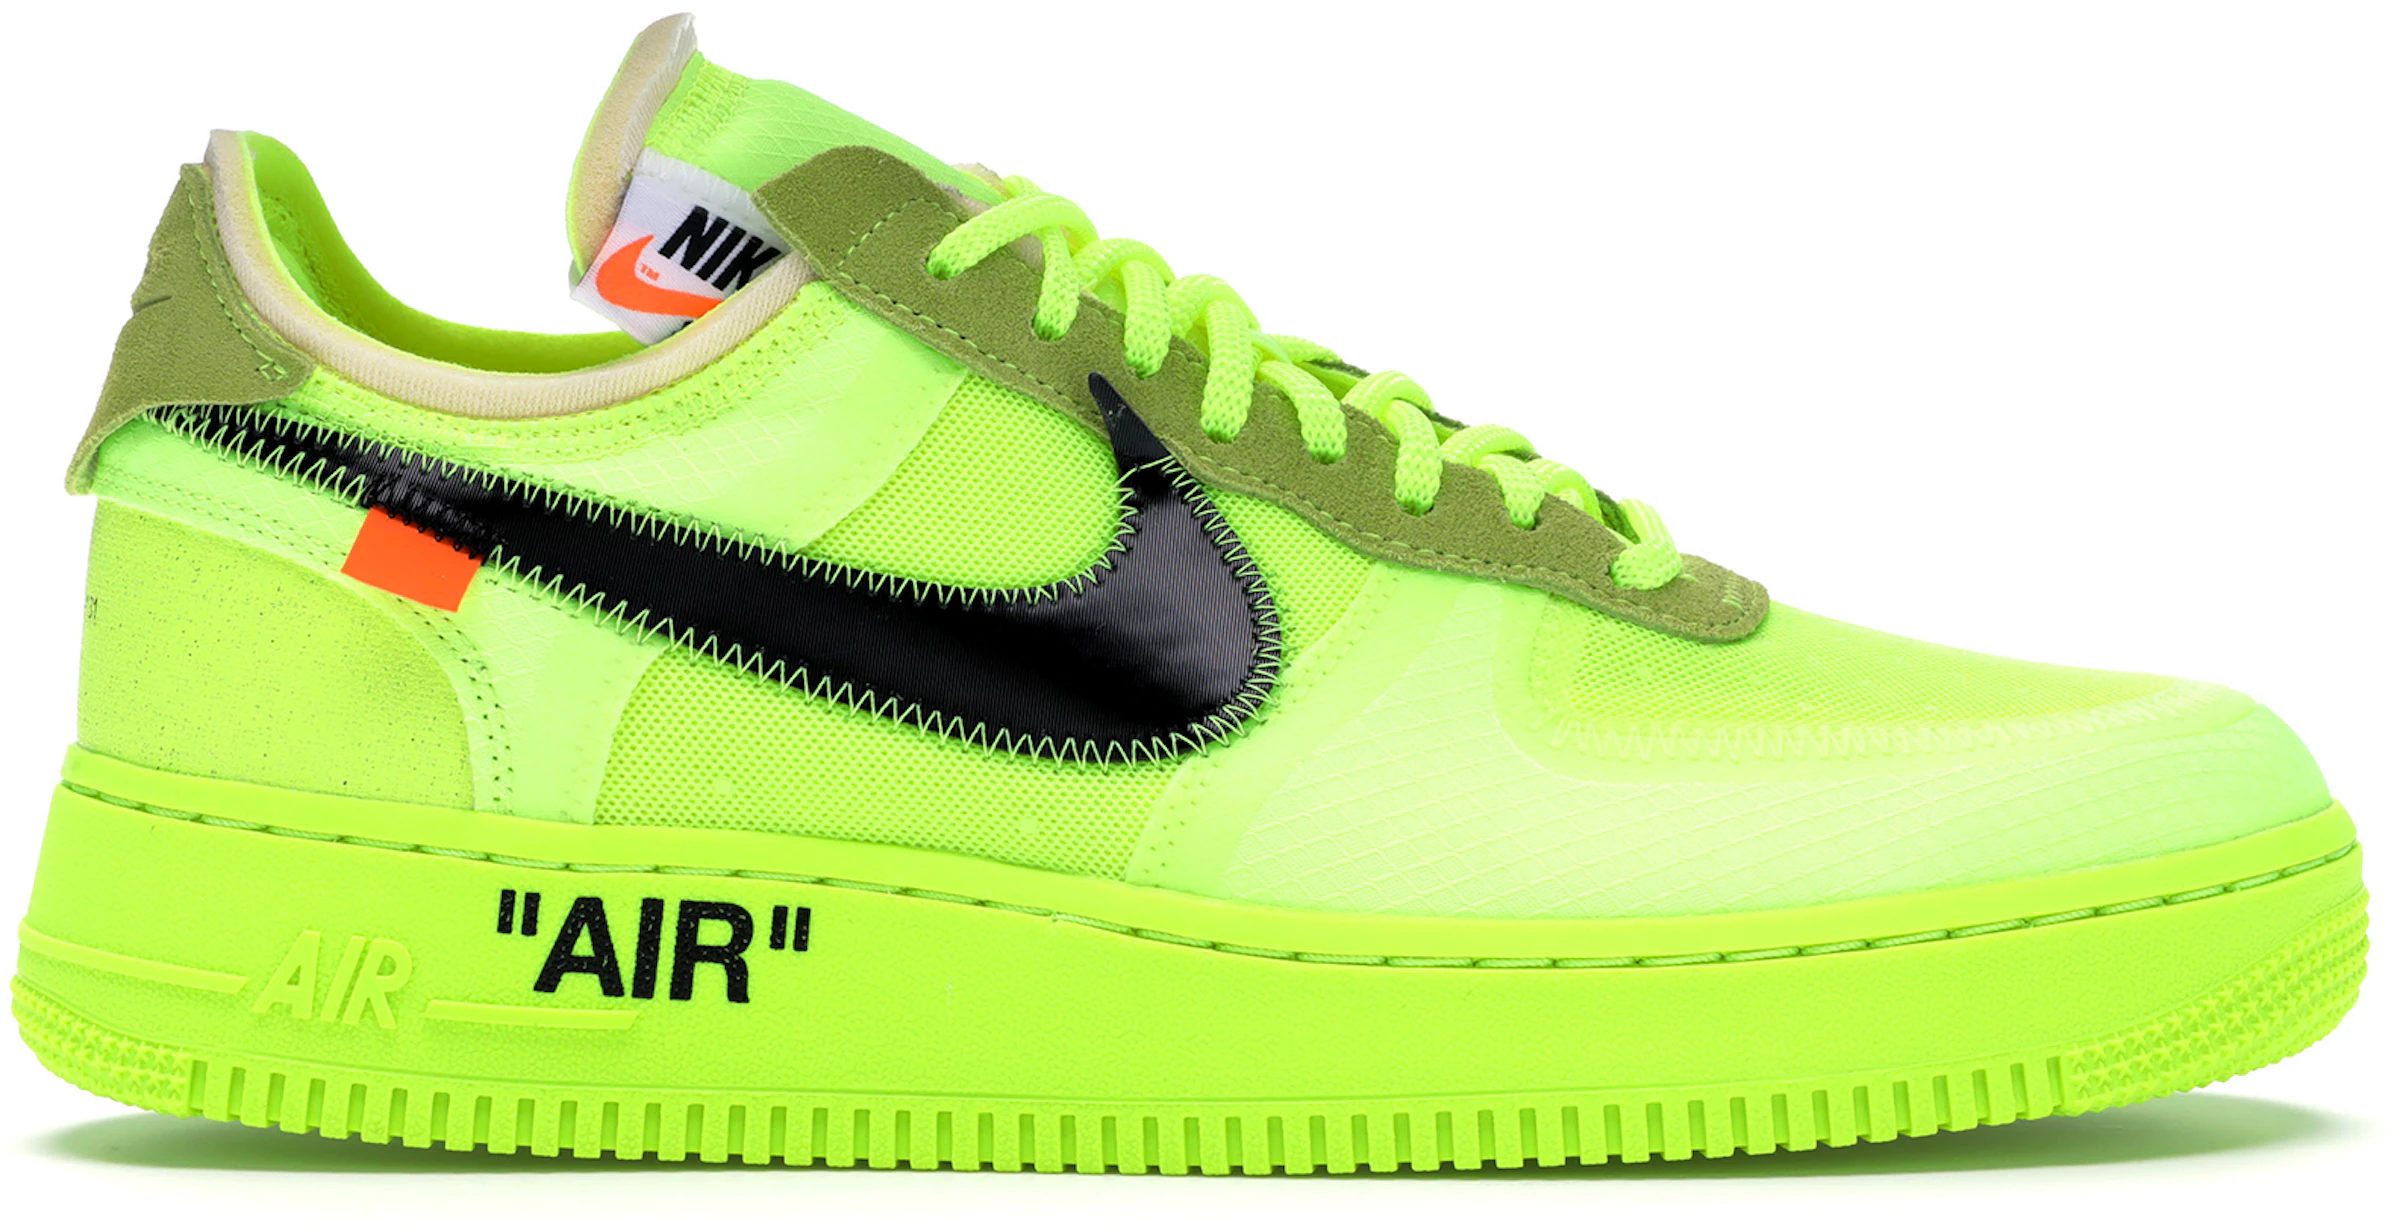 Nike Air Force Low Off-White Volt - AO4606-700 - ES